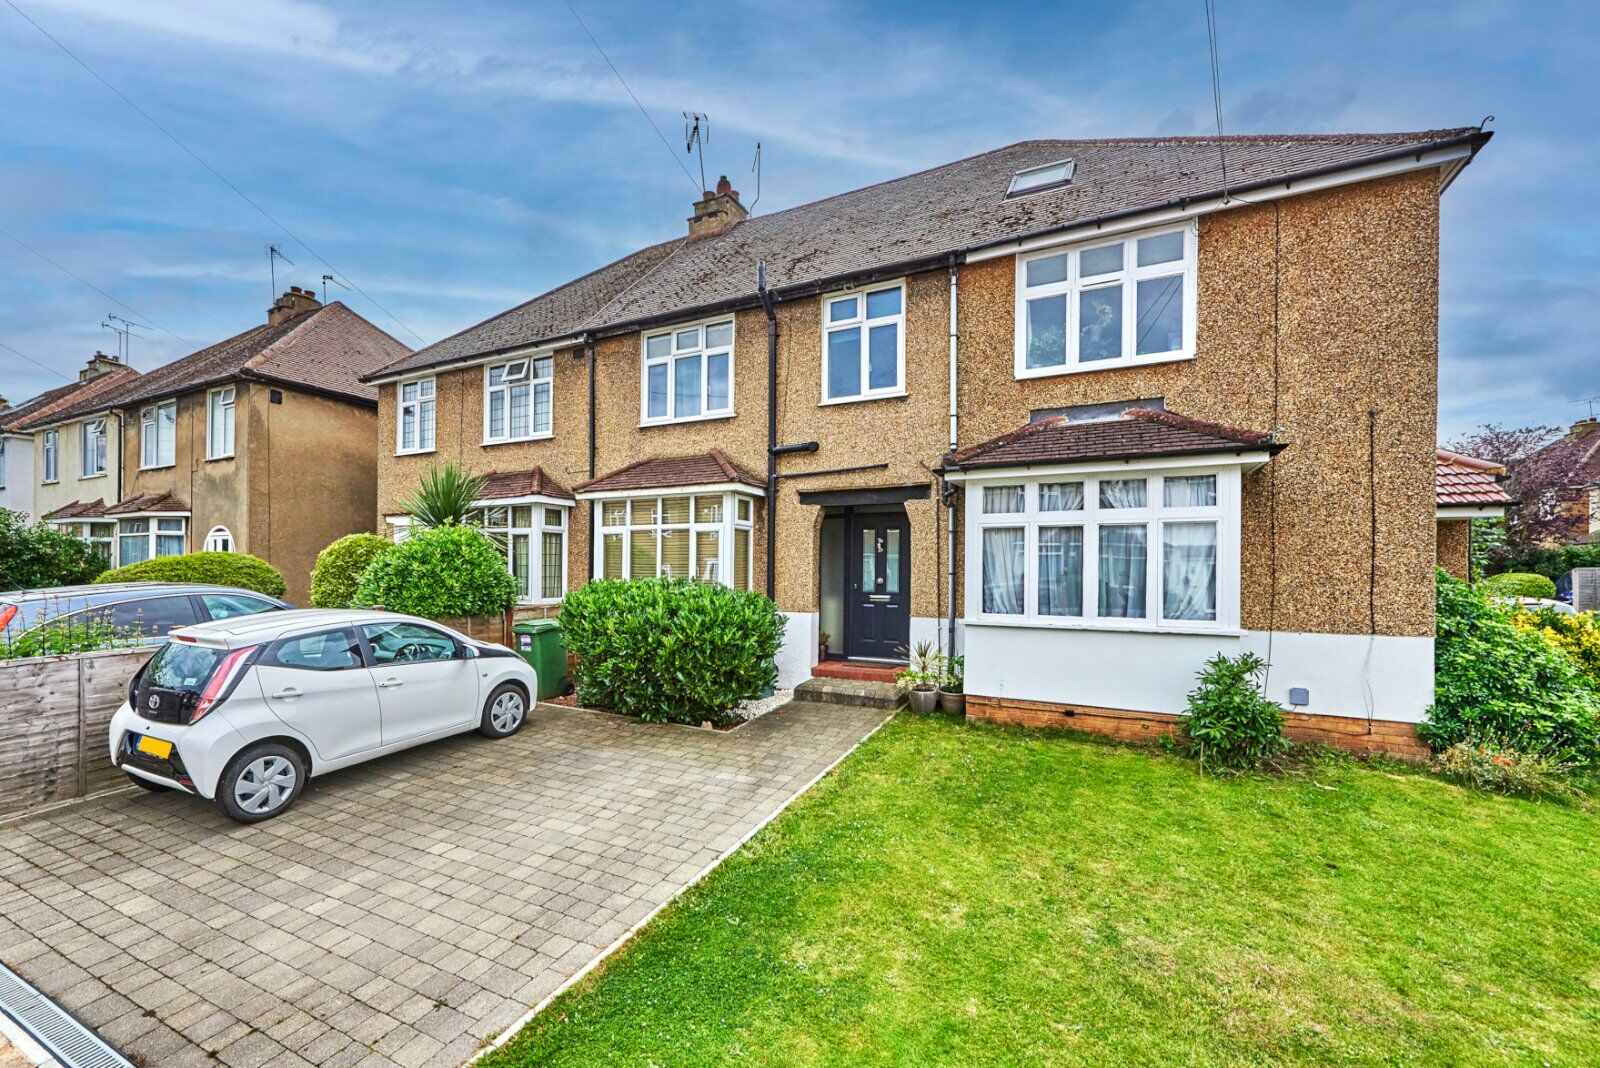 3 bedroom mid terraced house for sale Campfield Road, St. Albans, AL1, main image